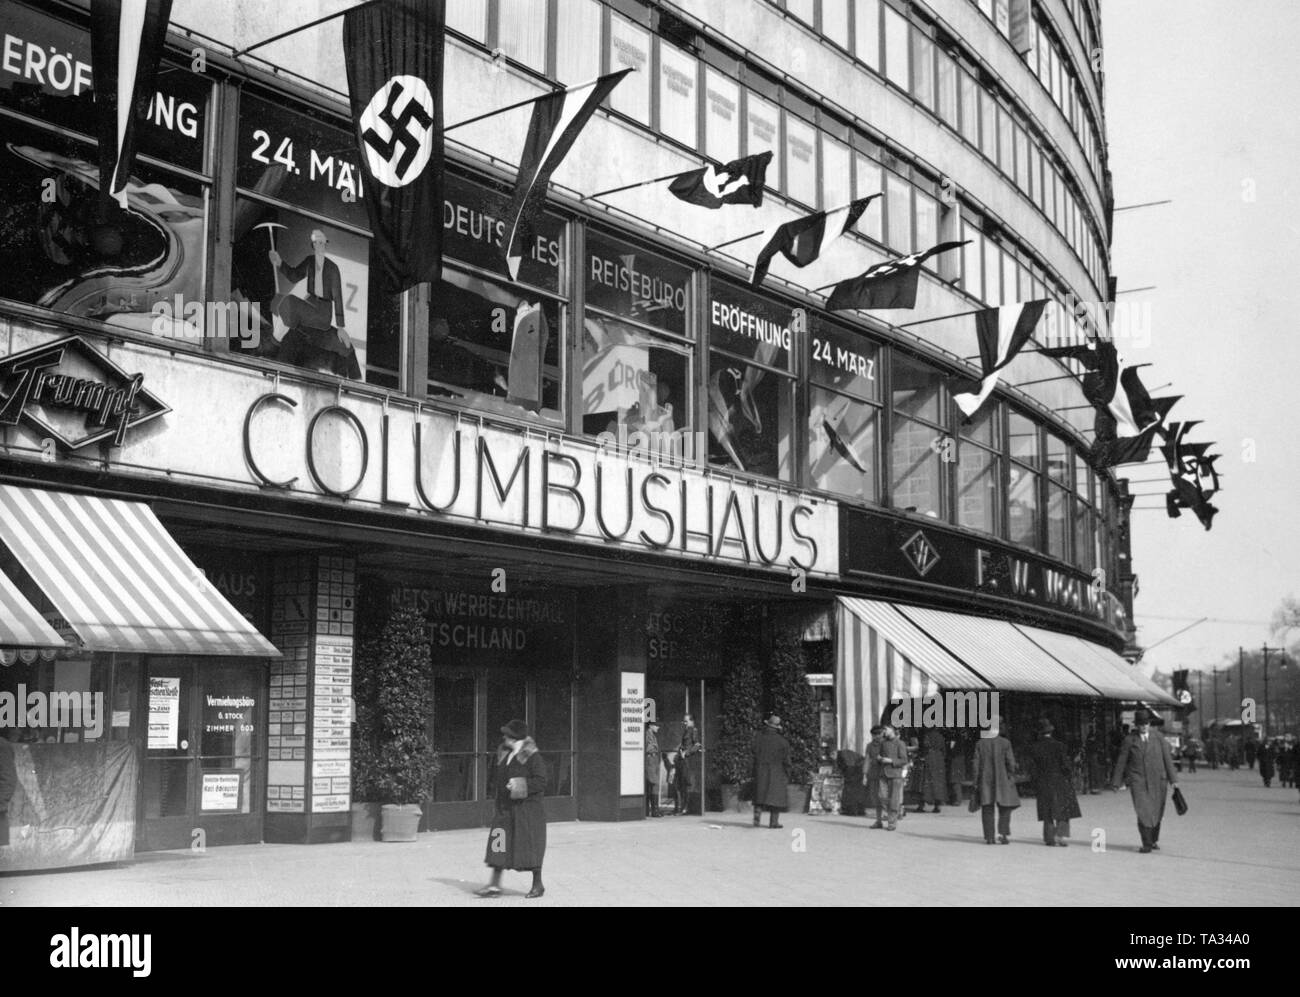 The commercial building Columbushaus at Potsdamer Platz in Berlin. The architect of the building was Erich Mendelsohn. In 1932 a shop was leased to the department store Woolworth. The office and shopping building was the first in the country to have an artificial ventilation system. In the wake of the popular uprising on 17 June 1953, the building was burnt down. Stock Photo